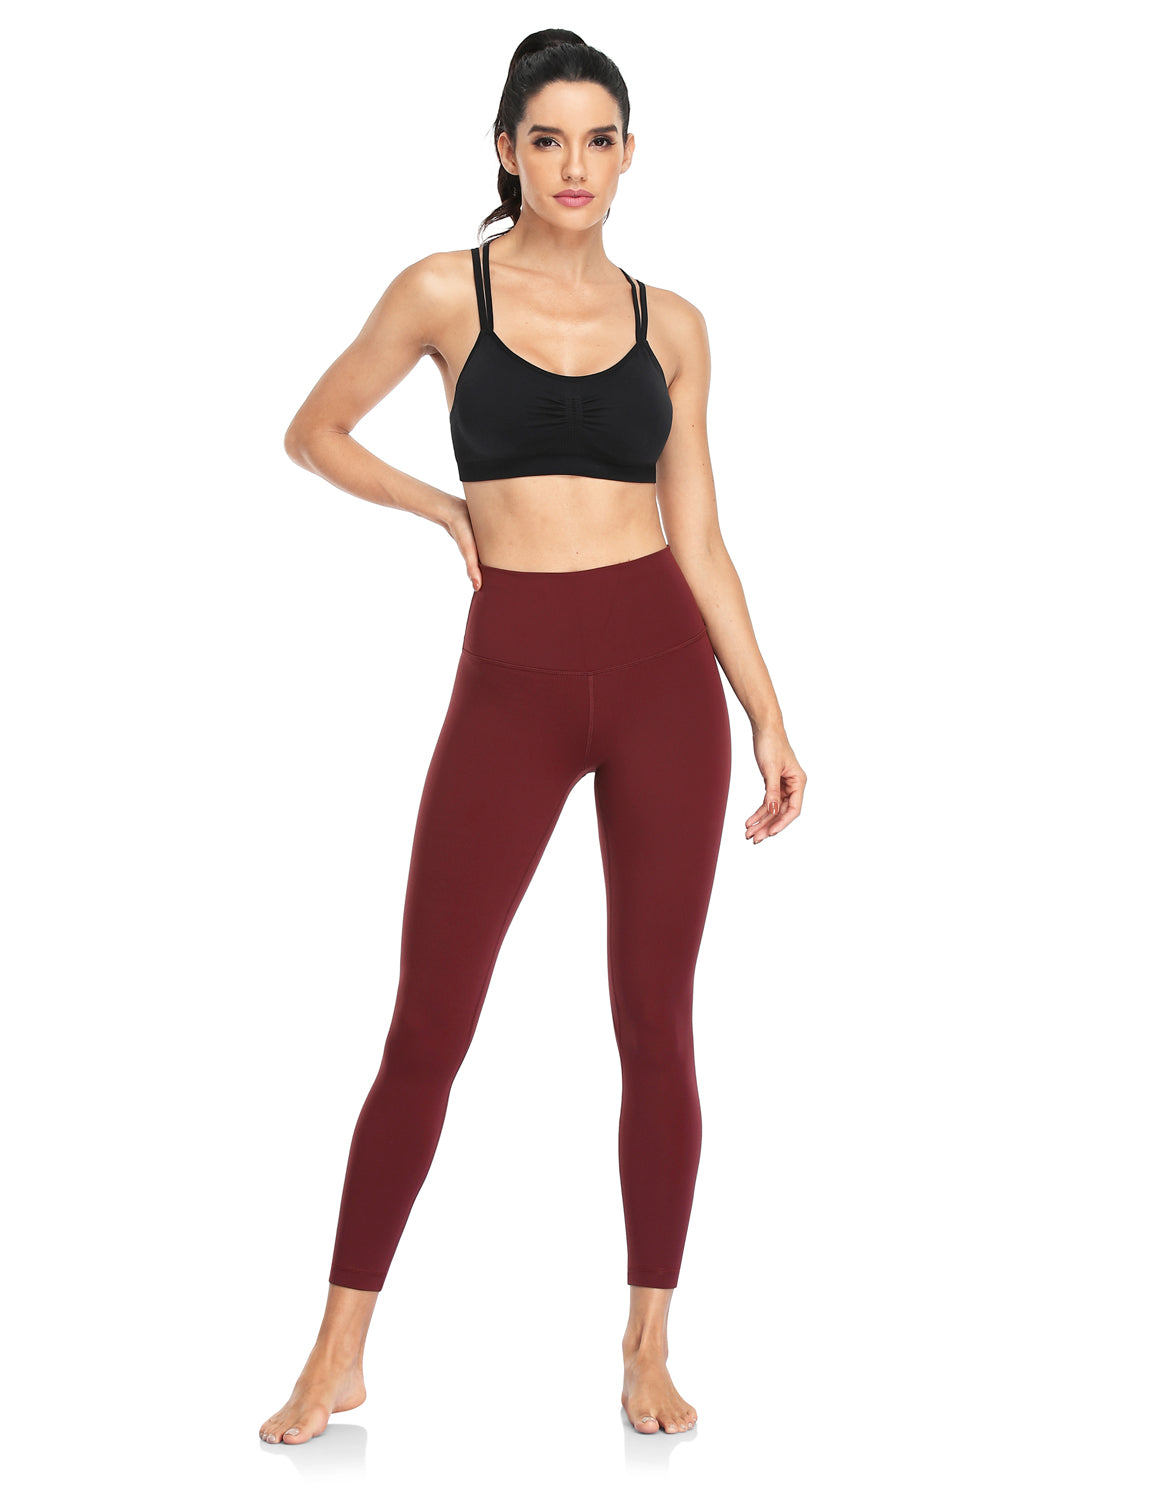  HeyNuts Pure&Plain 7/8 High Waisted Leggings For Women,  Athletic Compression Tummy Control Workout Yoga Pants 25 Vintage Plum XL